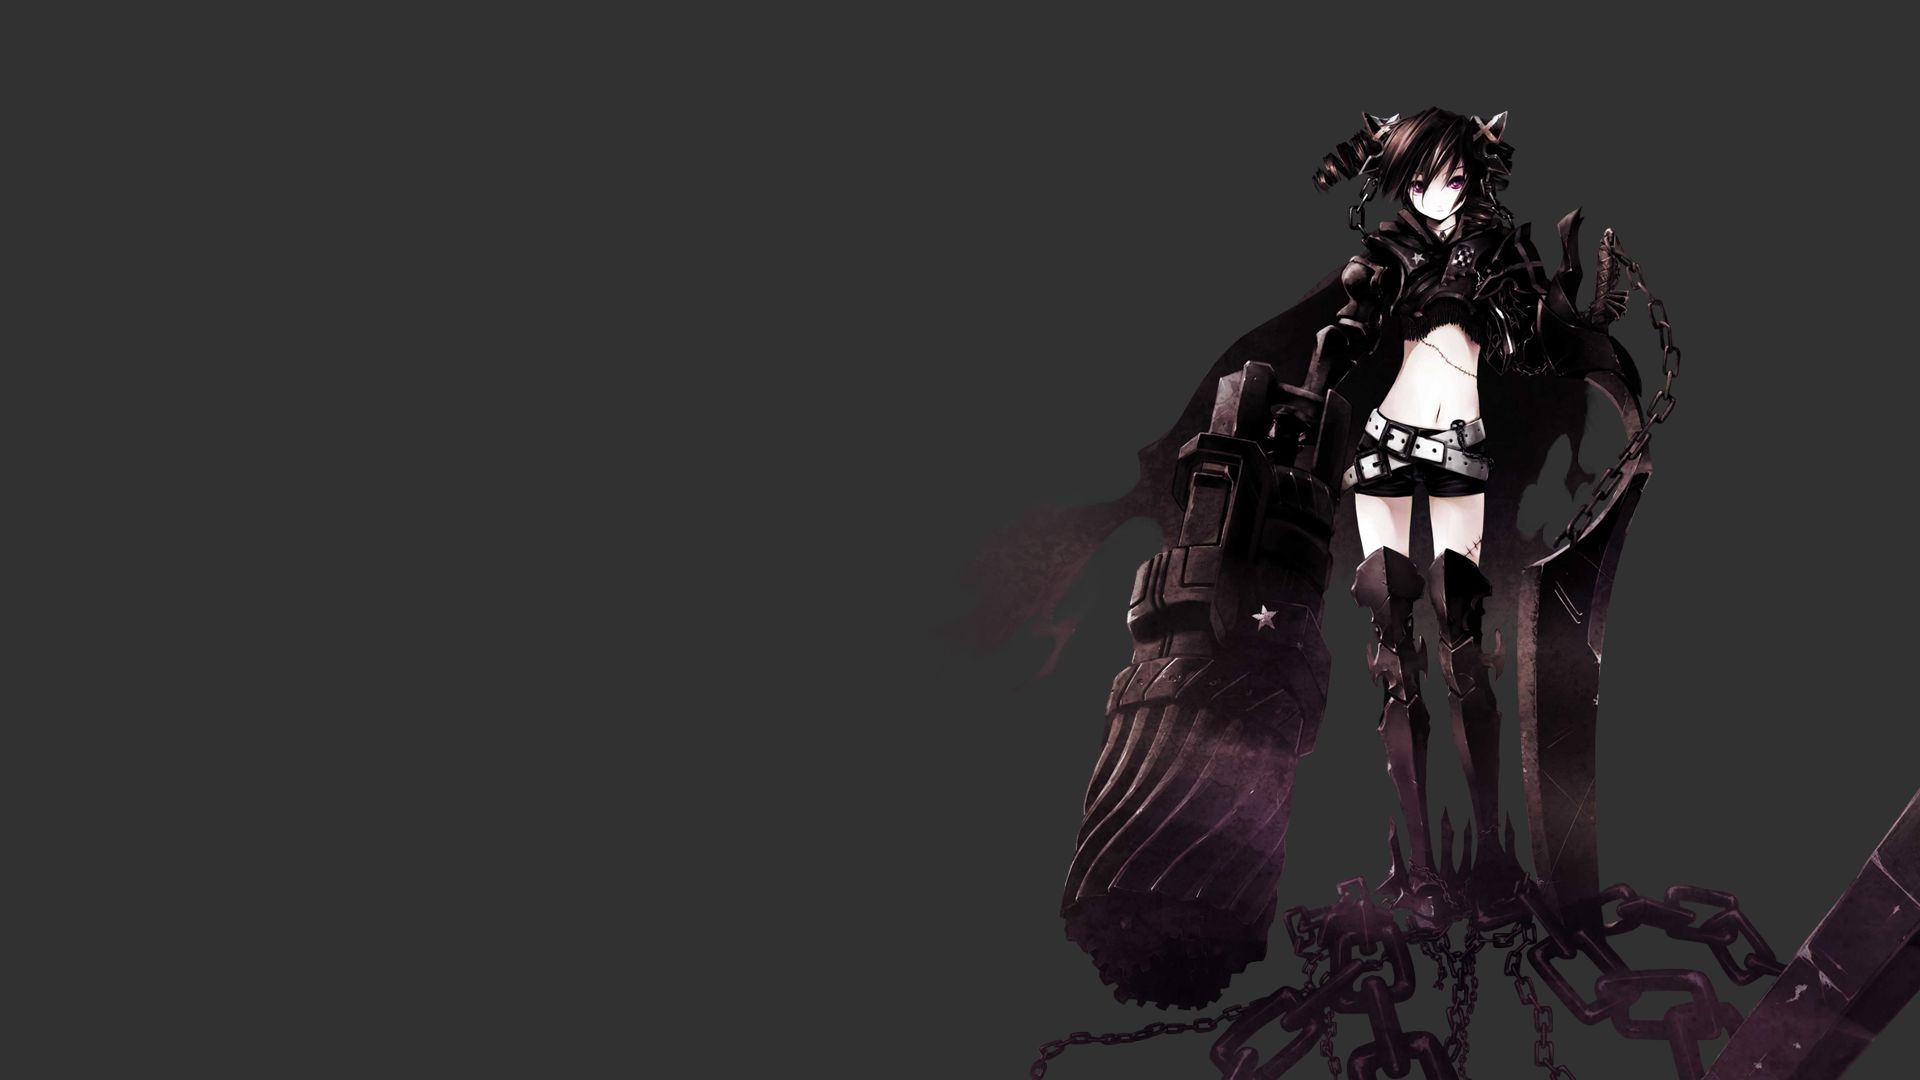 anime, black rock shooter, insane black rock shooter cell phone wallpapers